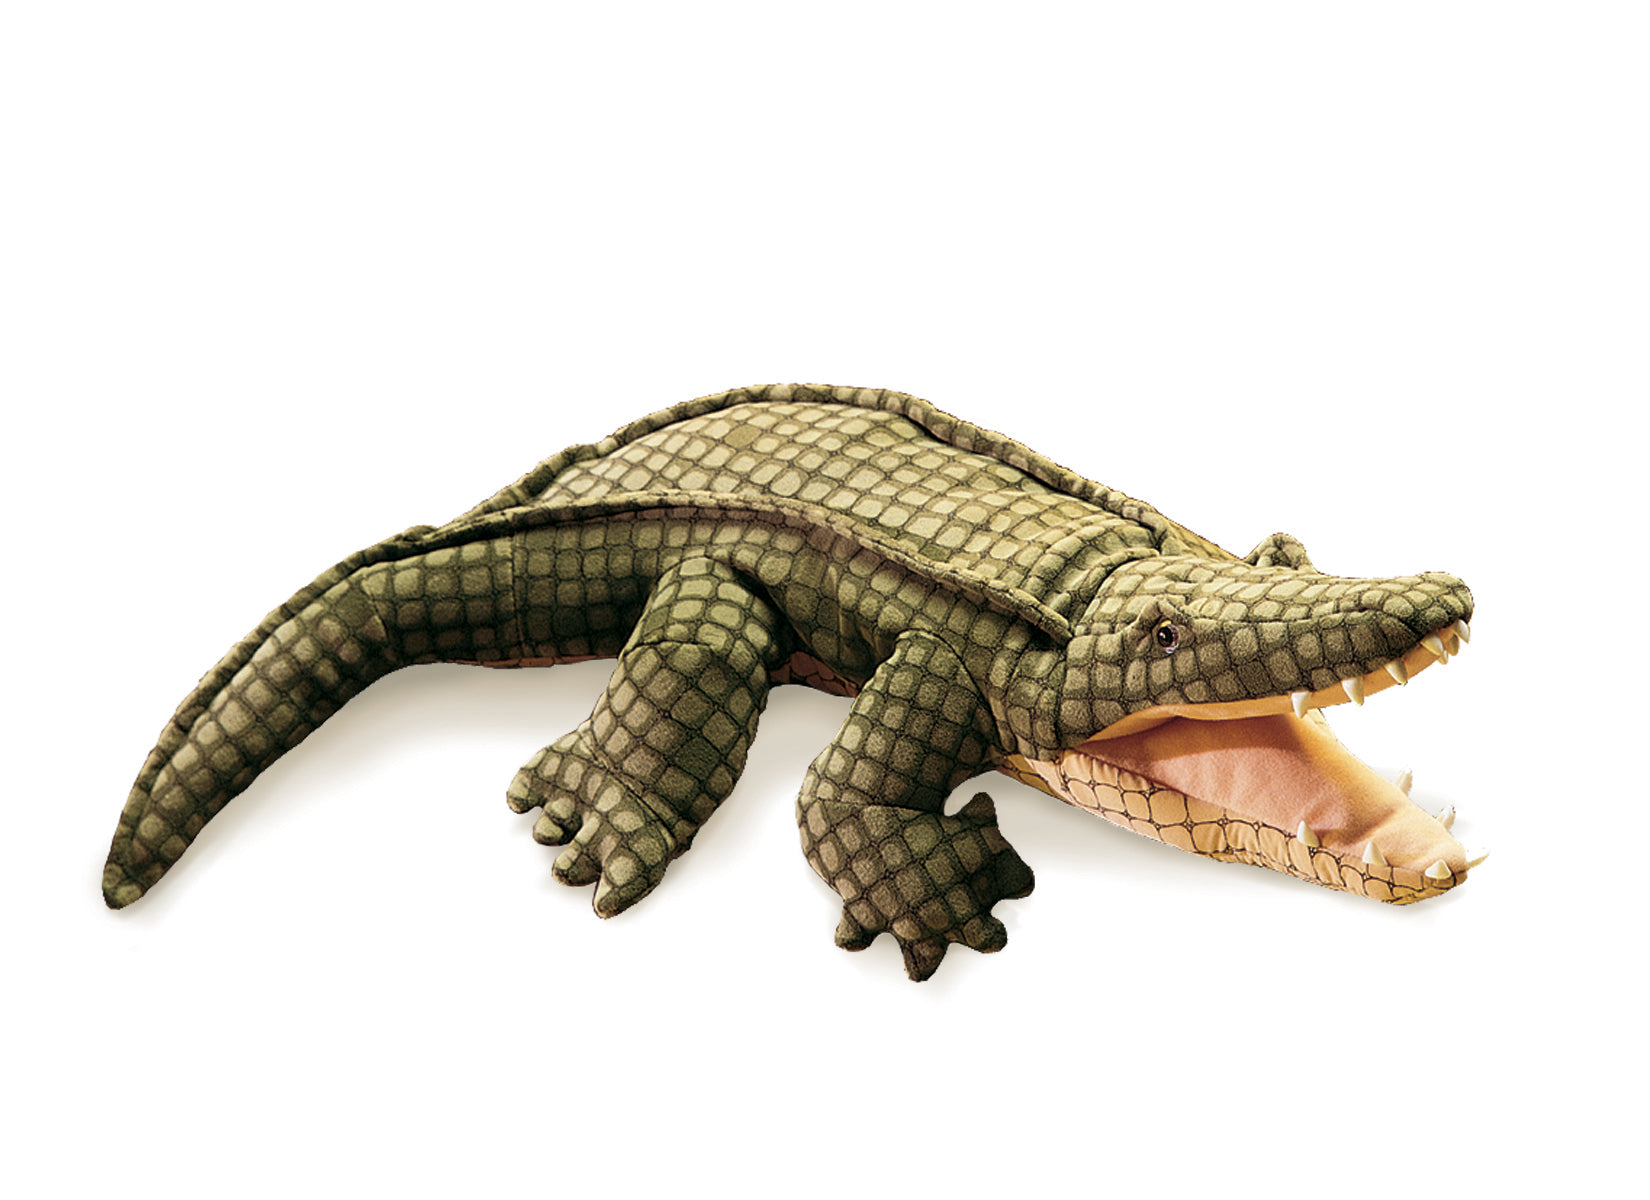 Realistic alligator puppet by Folkmanis. This beautiful puppet is made out of silk-screened velour, velveteen body and soft plastic teeth.  This puppet is 24 inches long, 13 inches wide, 2 inches tall  and weighs 7.36 oz. This item sells for $29.99.